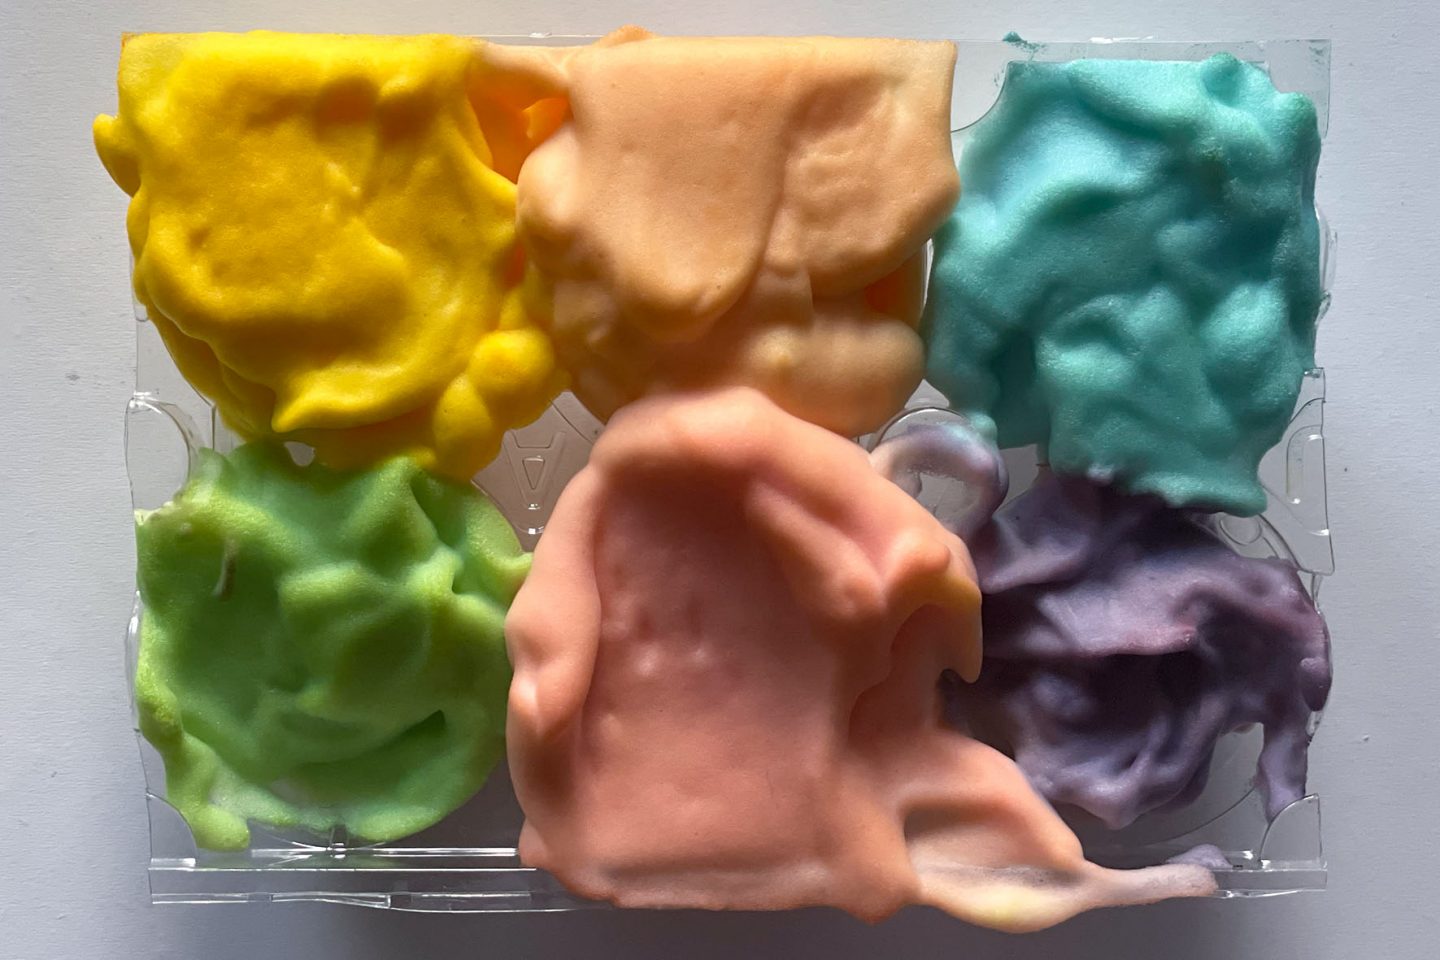 Shaving cream and food dye are used to teach kids about color theory